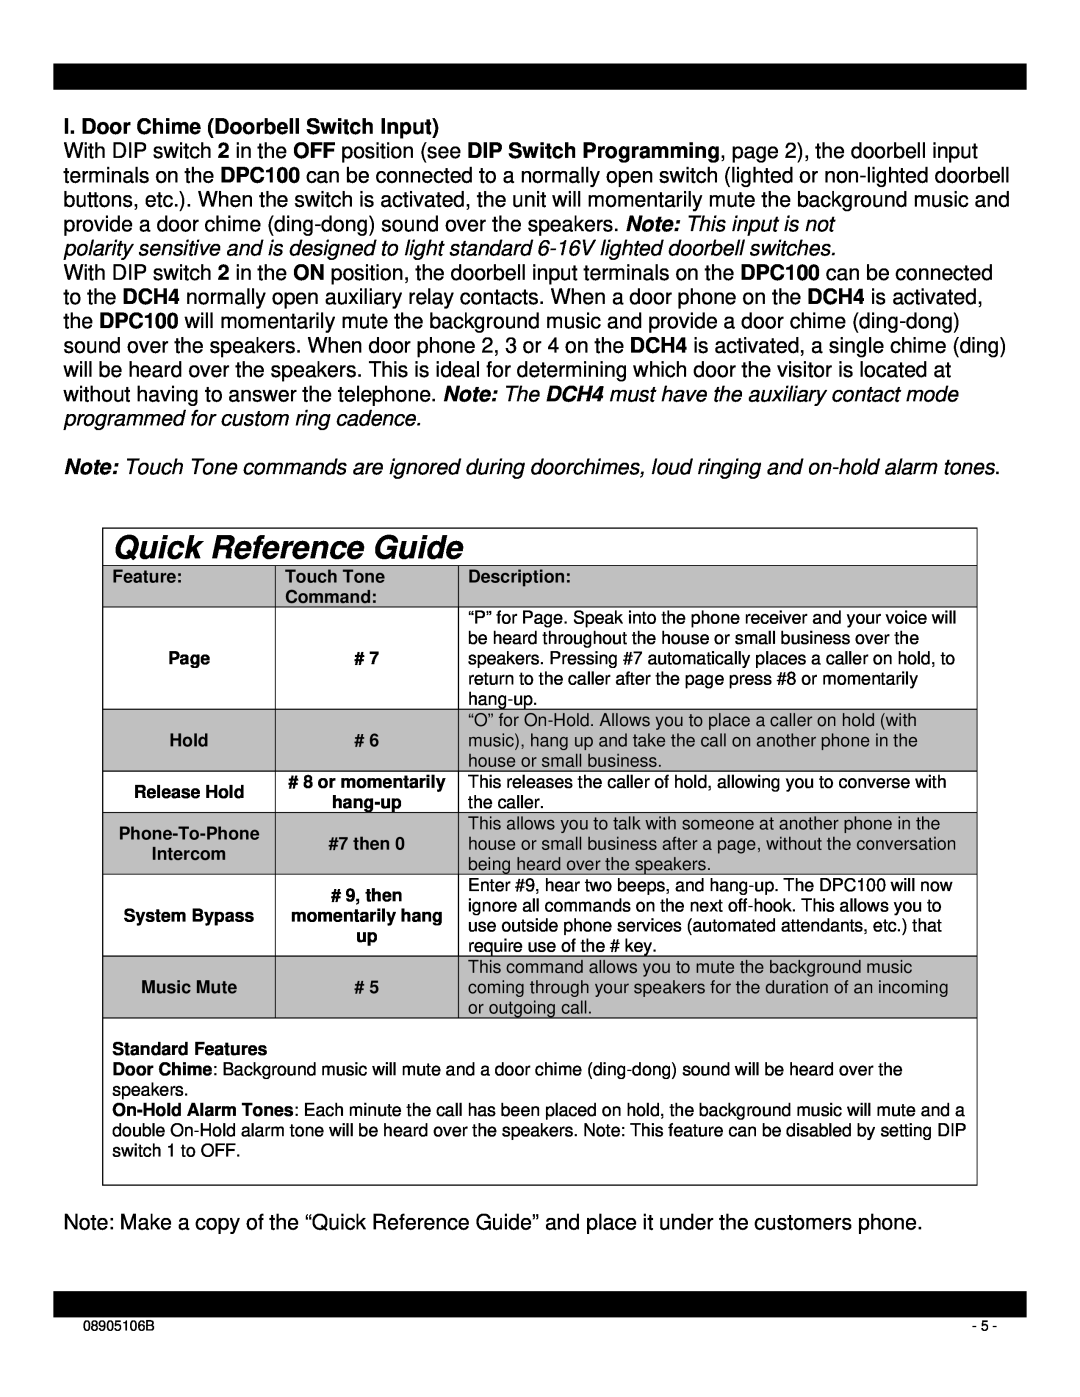 Xantech DPC100 installation instructions I. Door Chime Doorbell Switch Input, Quick Reference Guide 